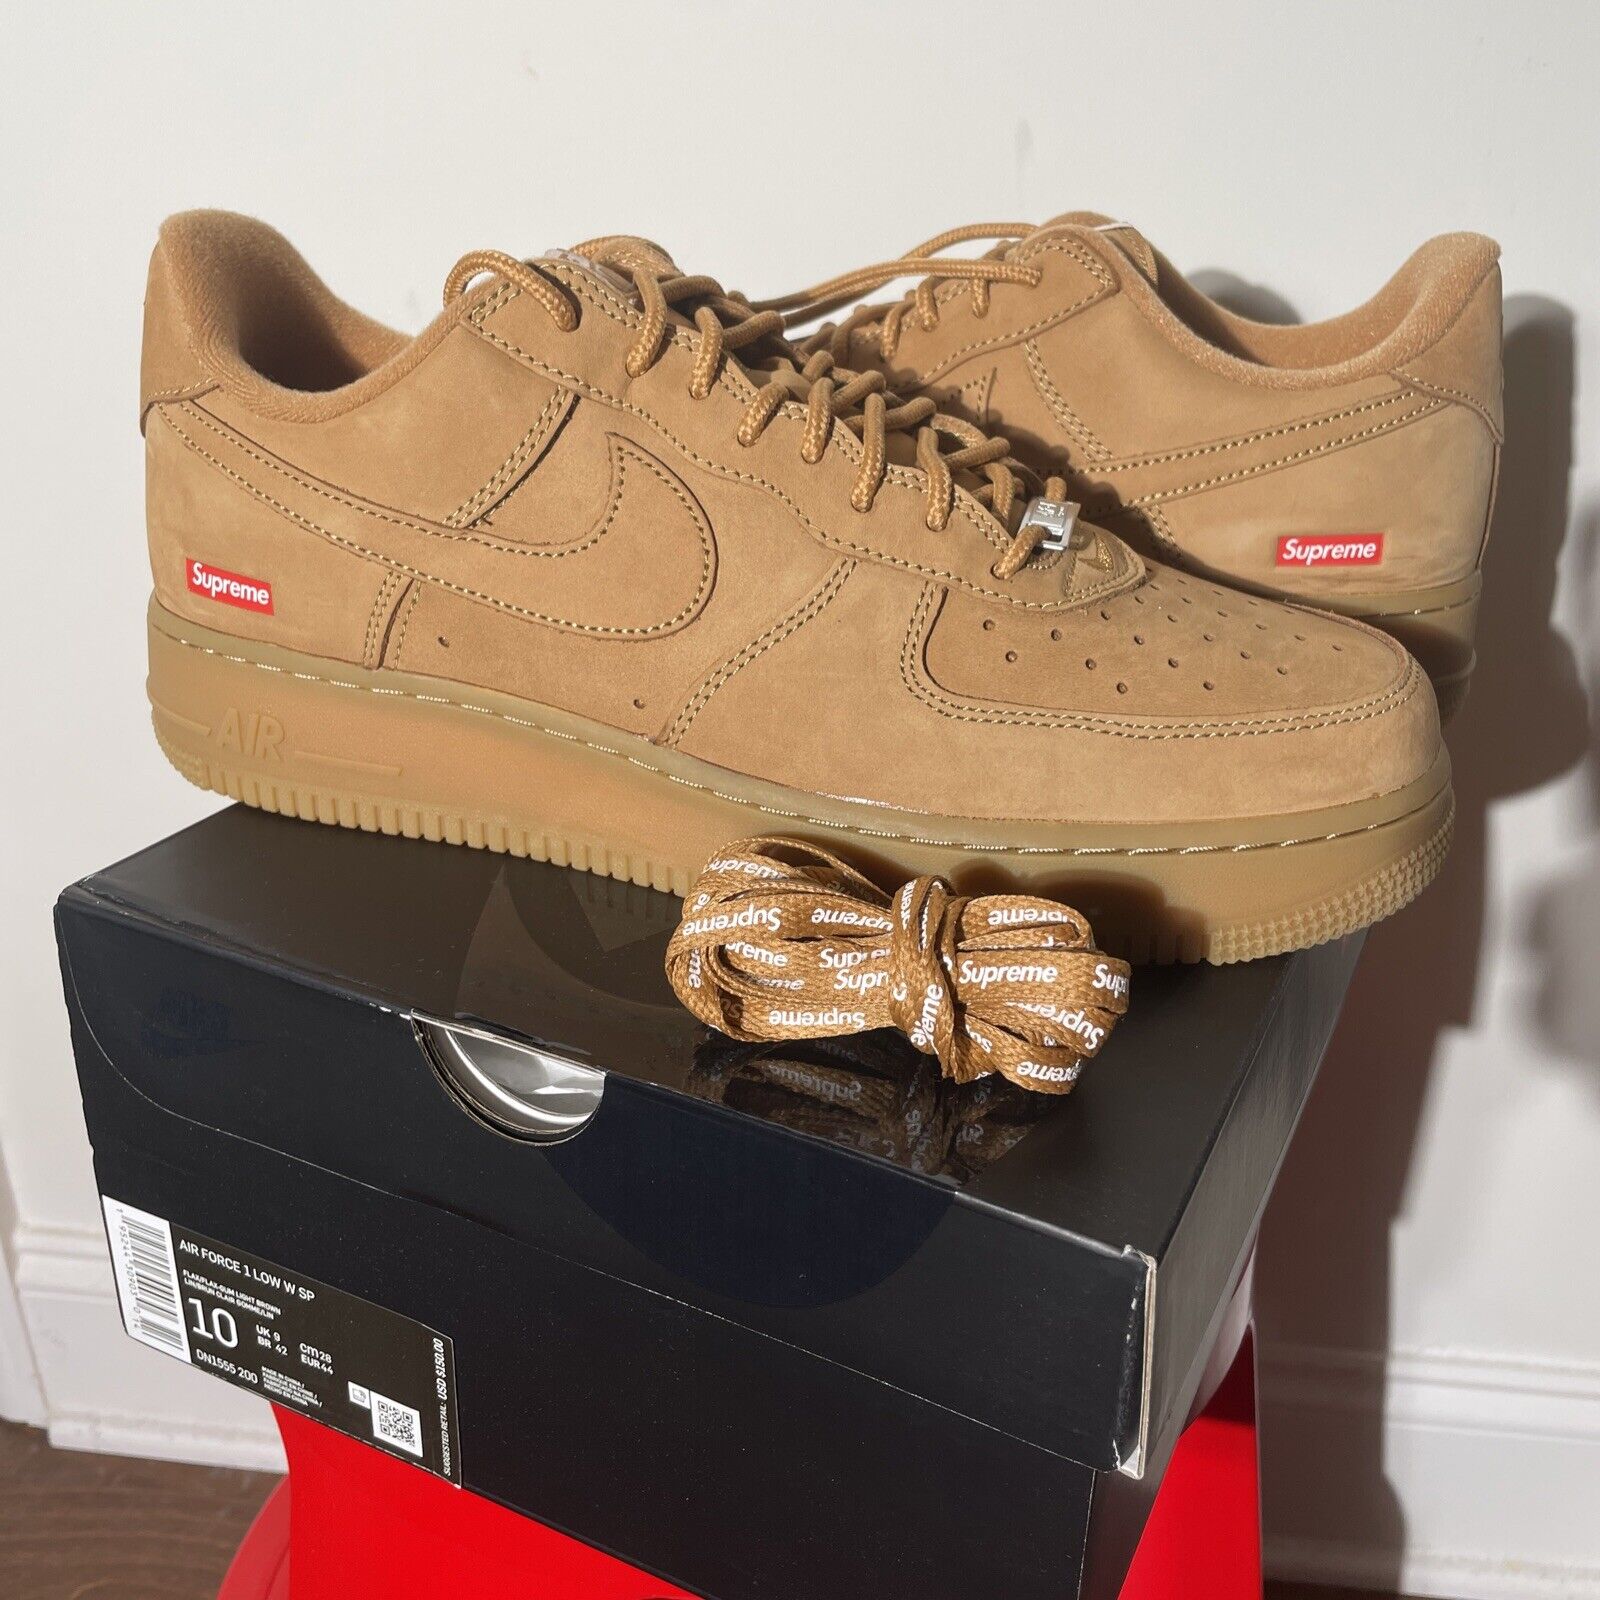 Nike Air Force 1 Low SP Supreme Wheat Flax (DN1555-200) In Hands 